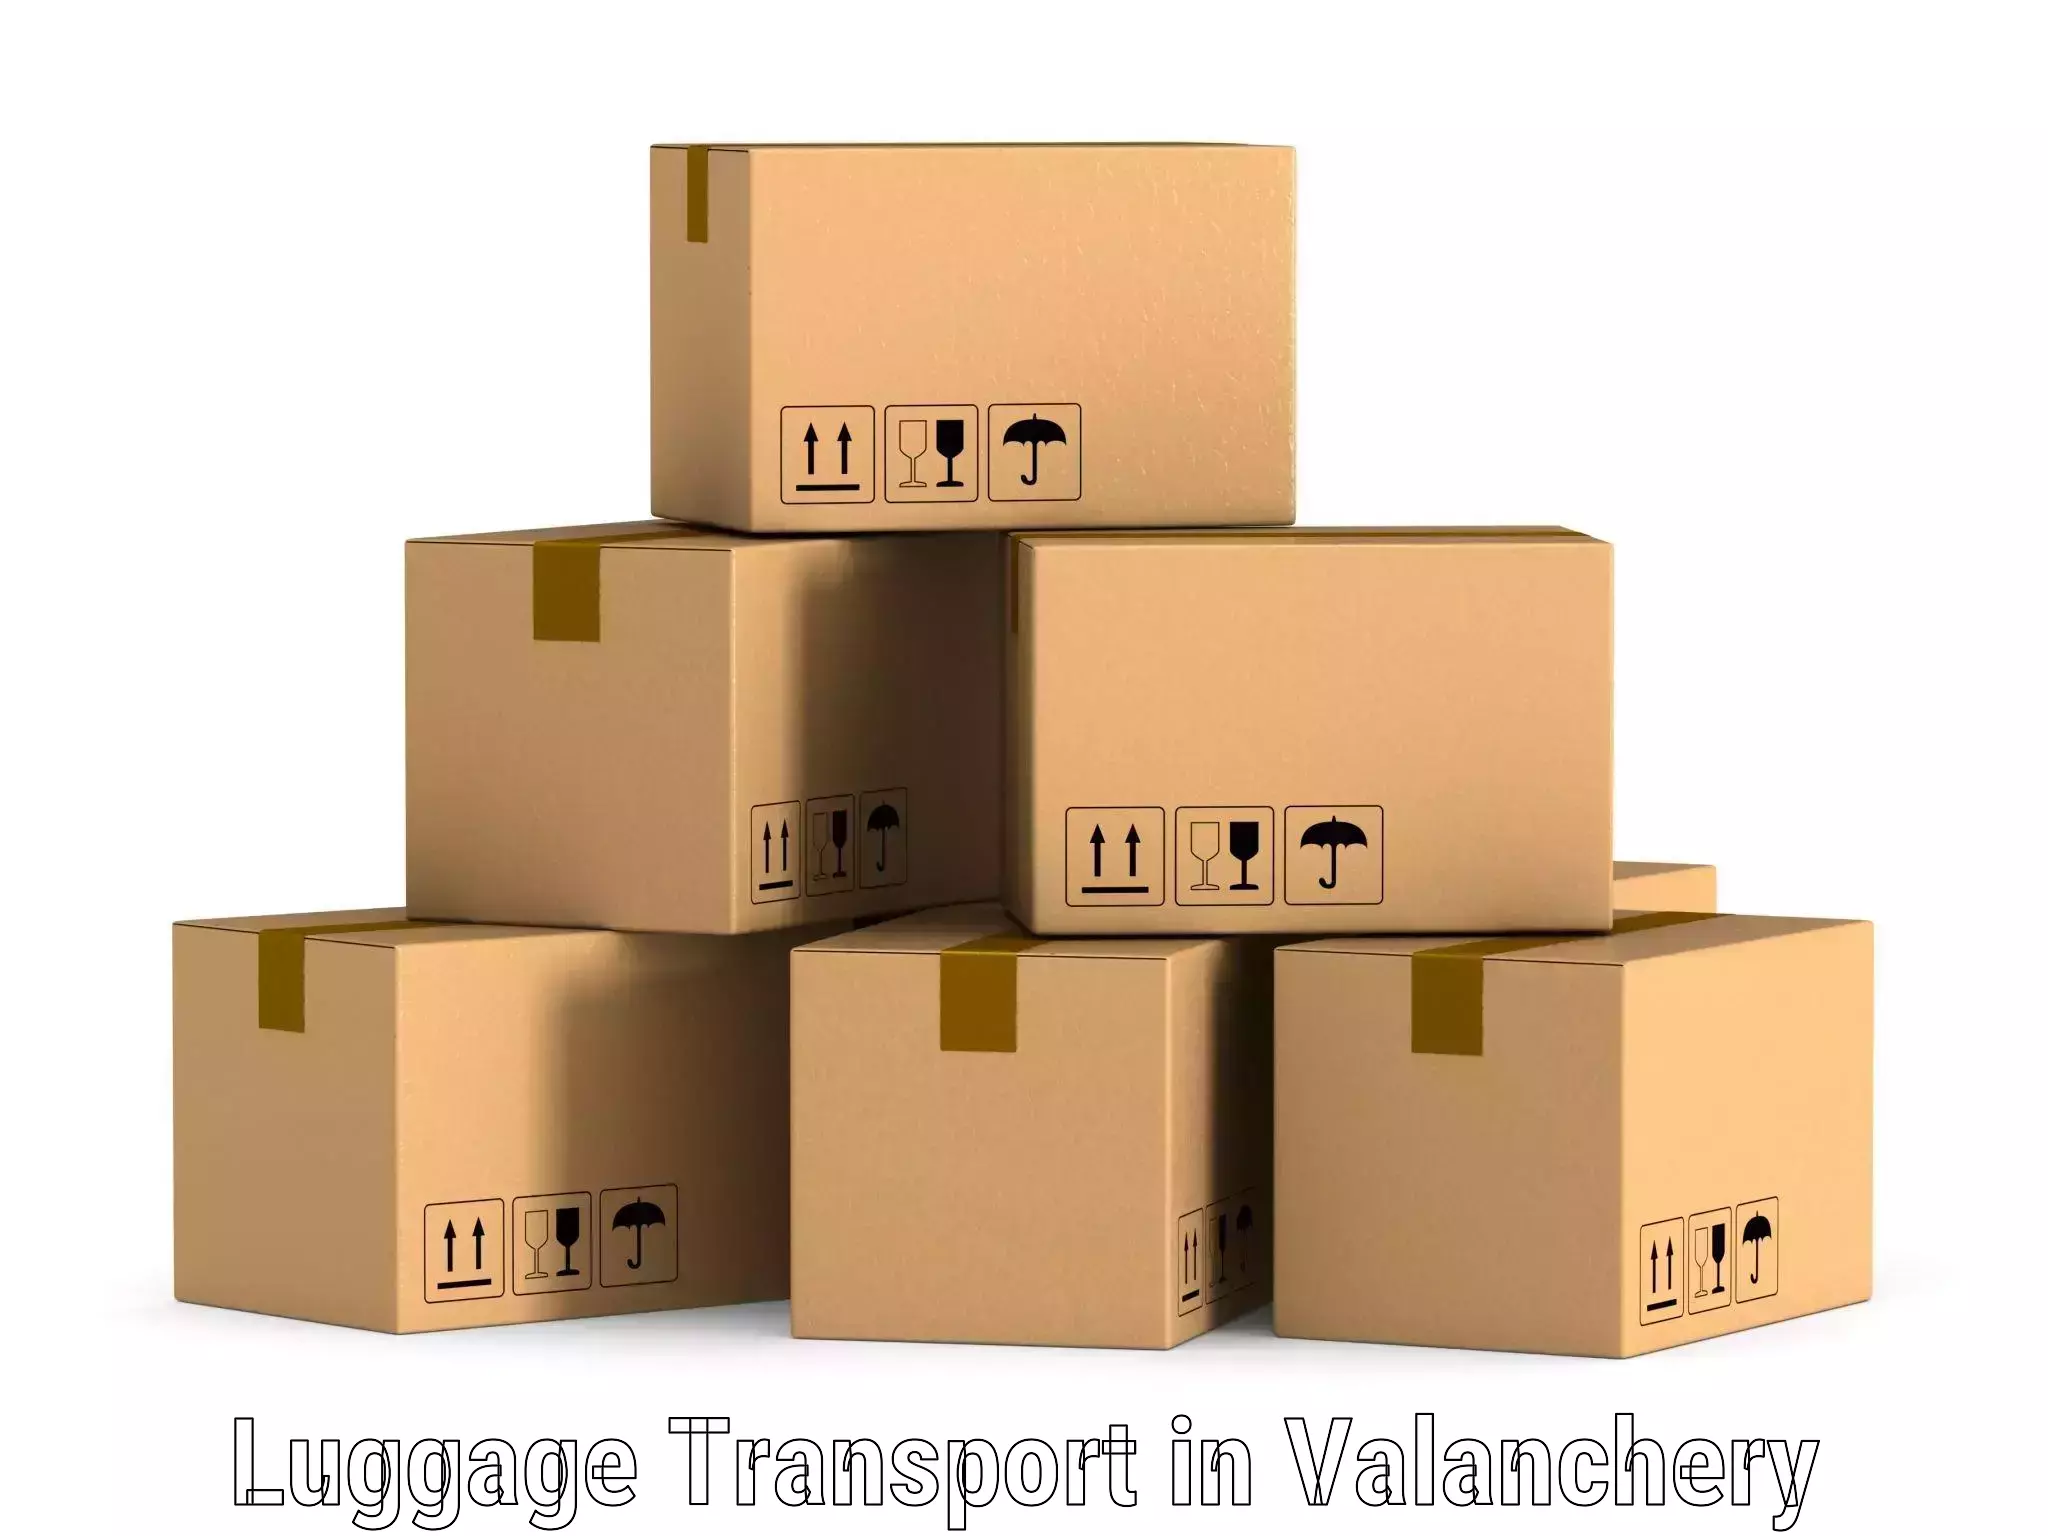 Baggage transport updates in Valanchery